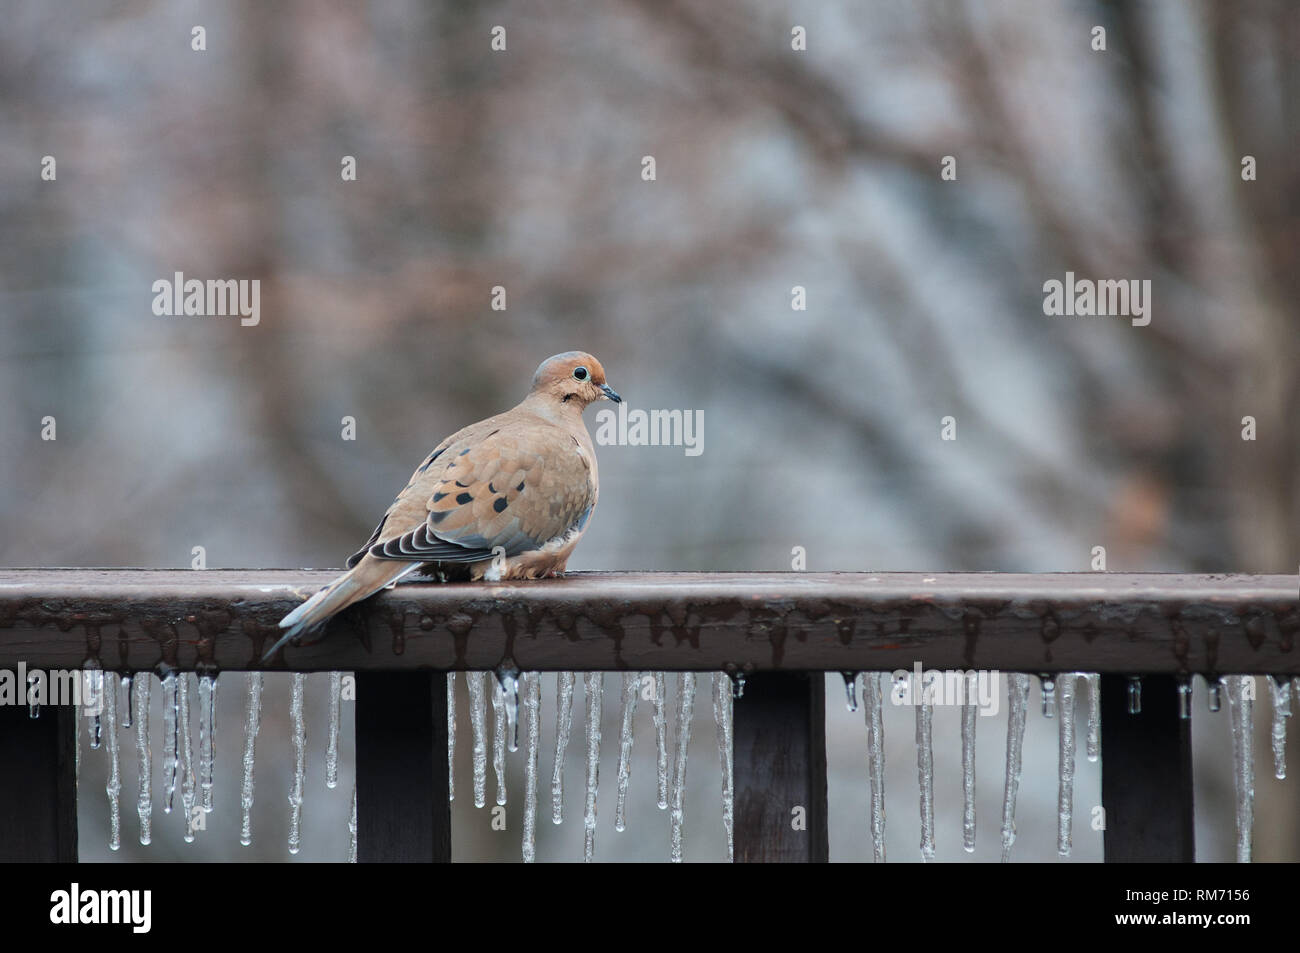 Morning dove sitting on a railing covered in icicles Stock Photo